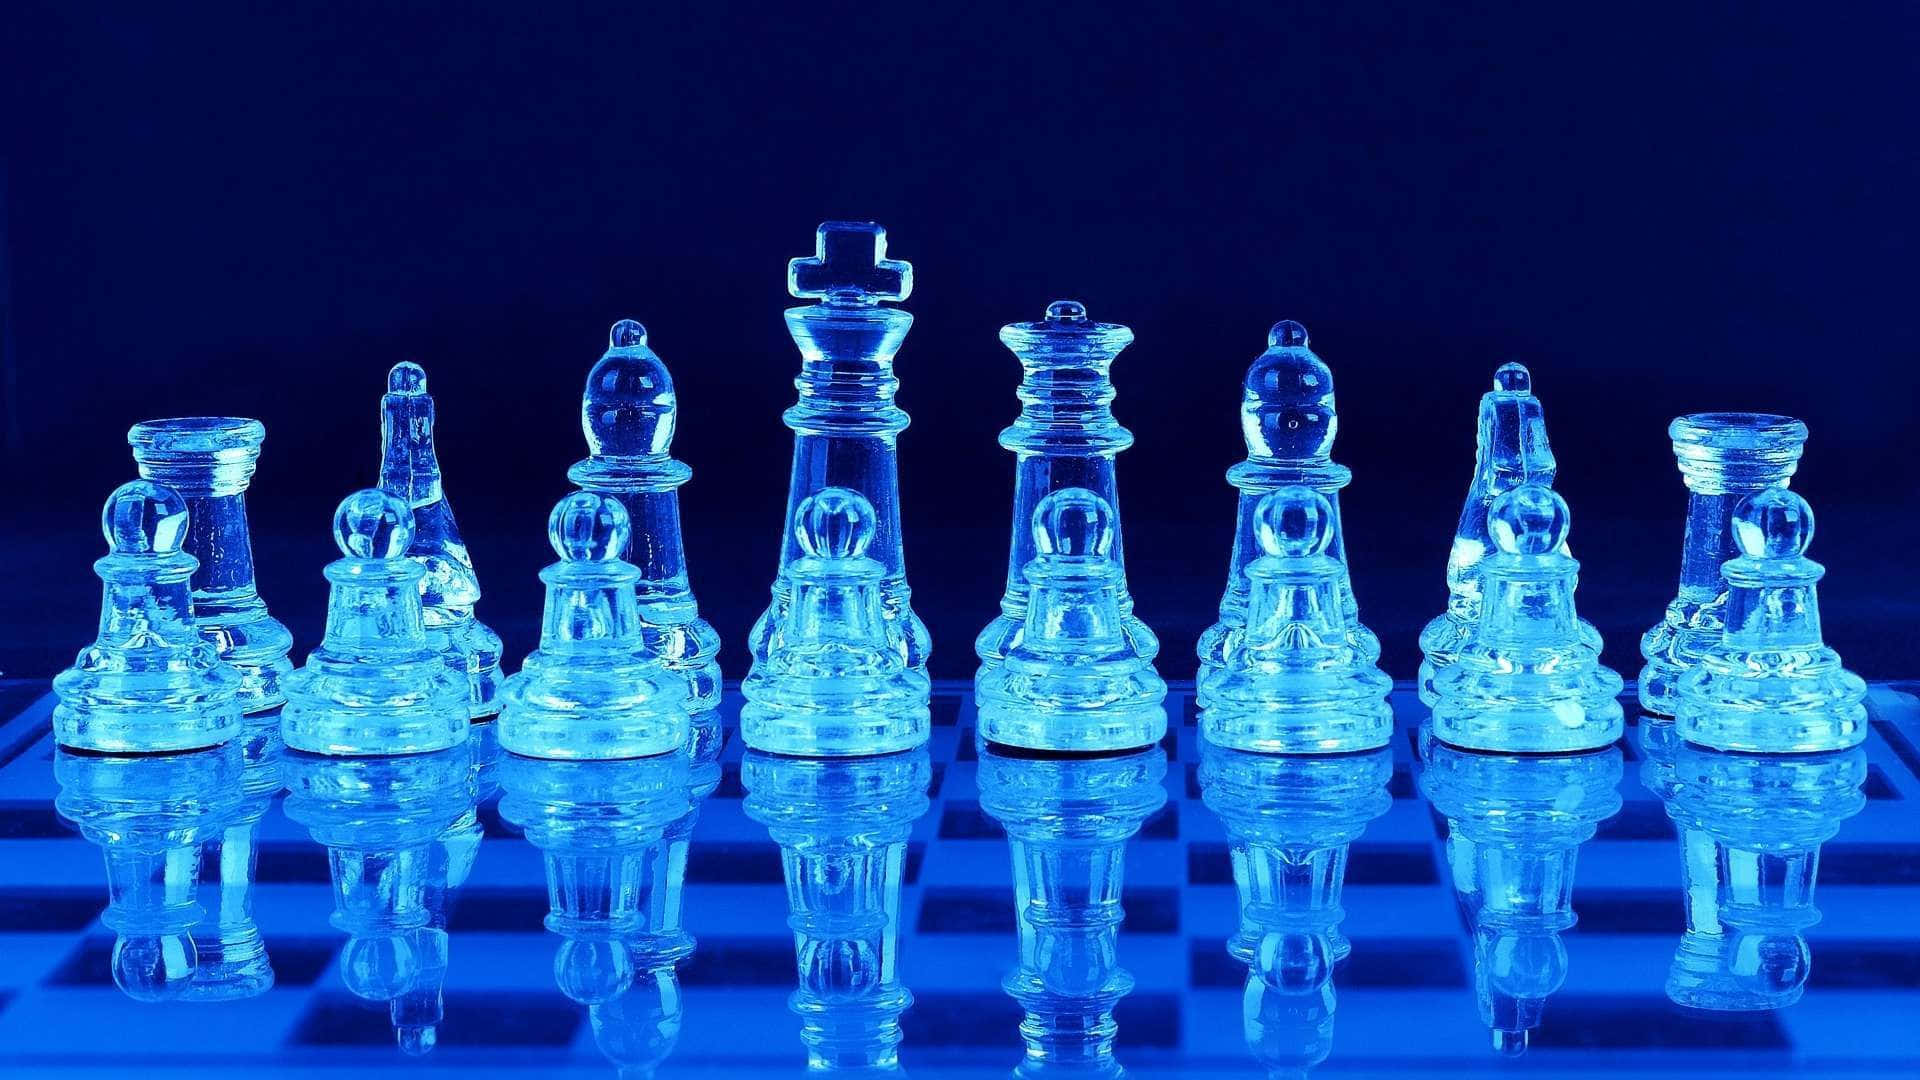 A Chess Set With Blue Lights On It